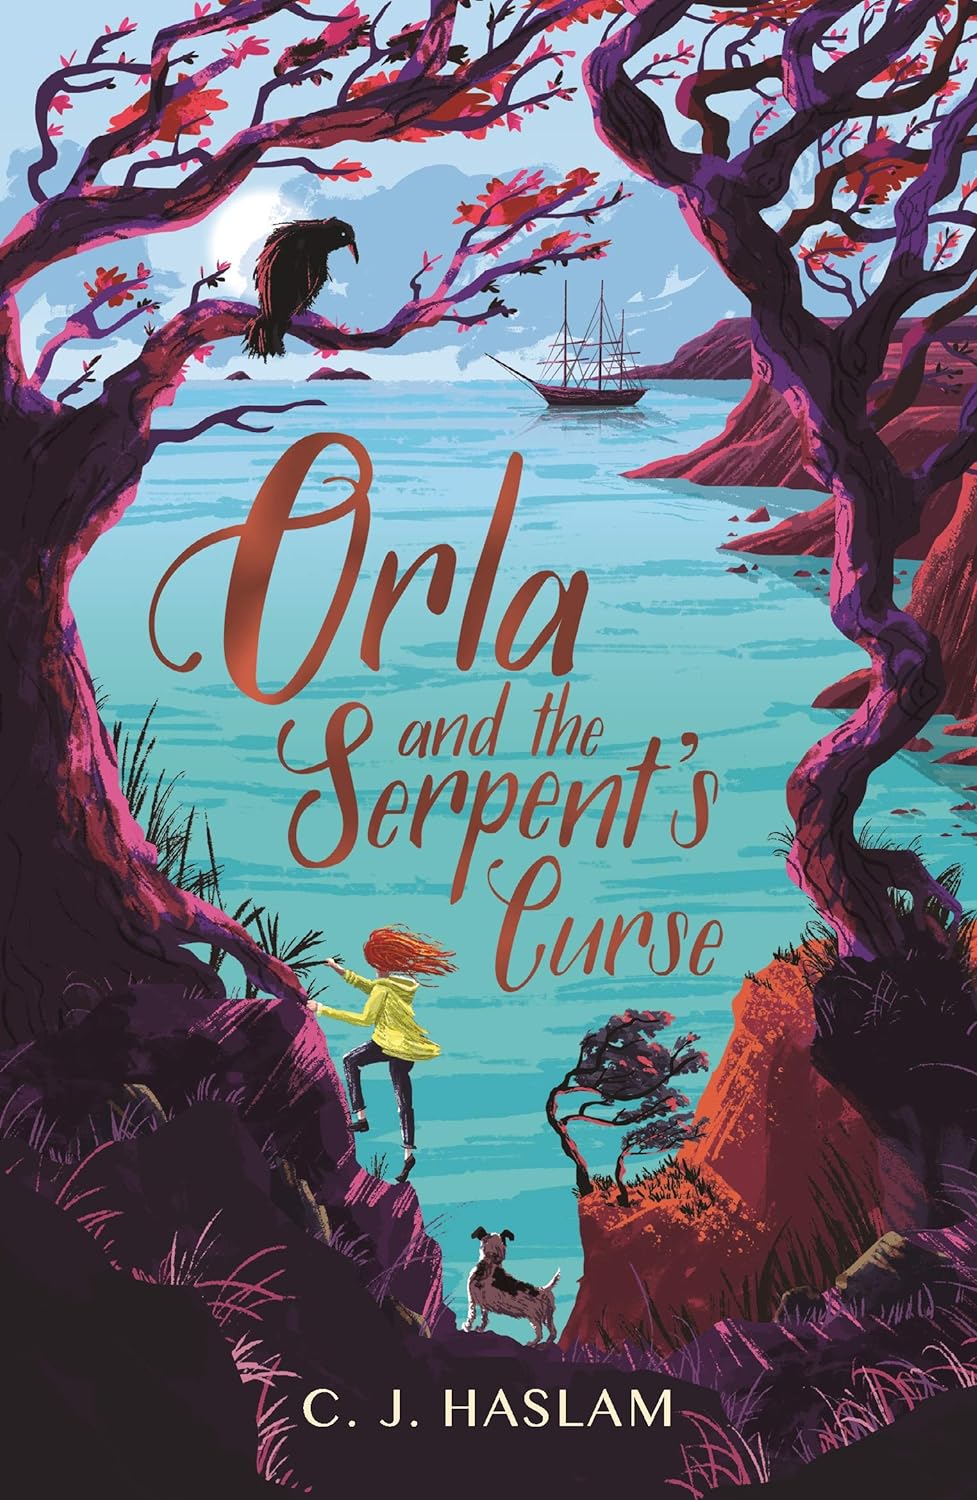 Children's Fiction - Orla and the Serpent's Curse